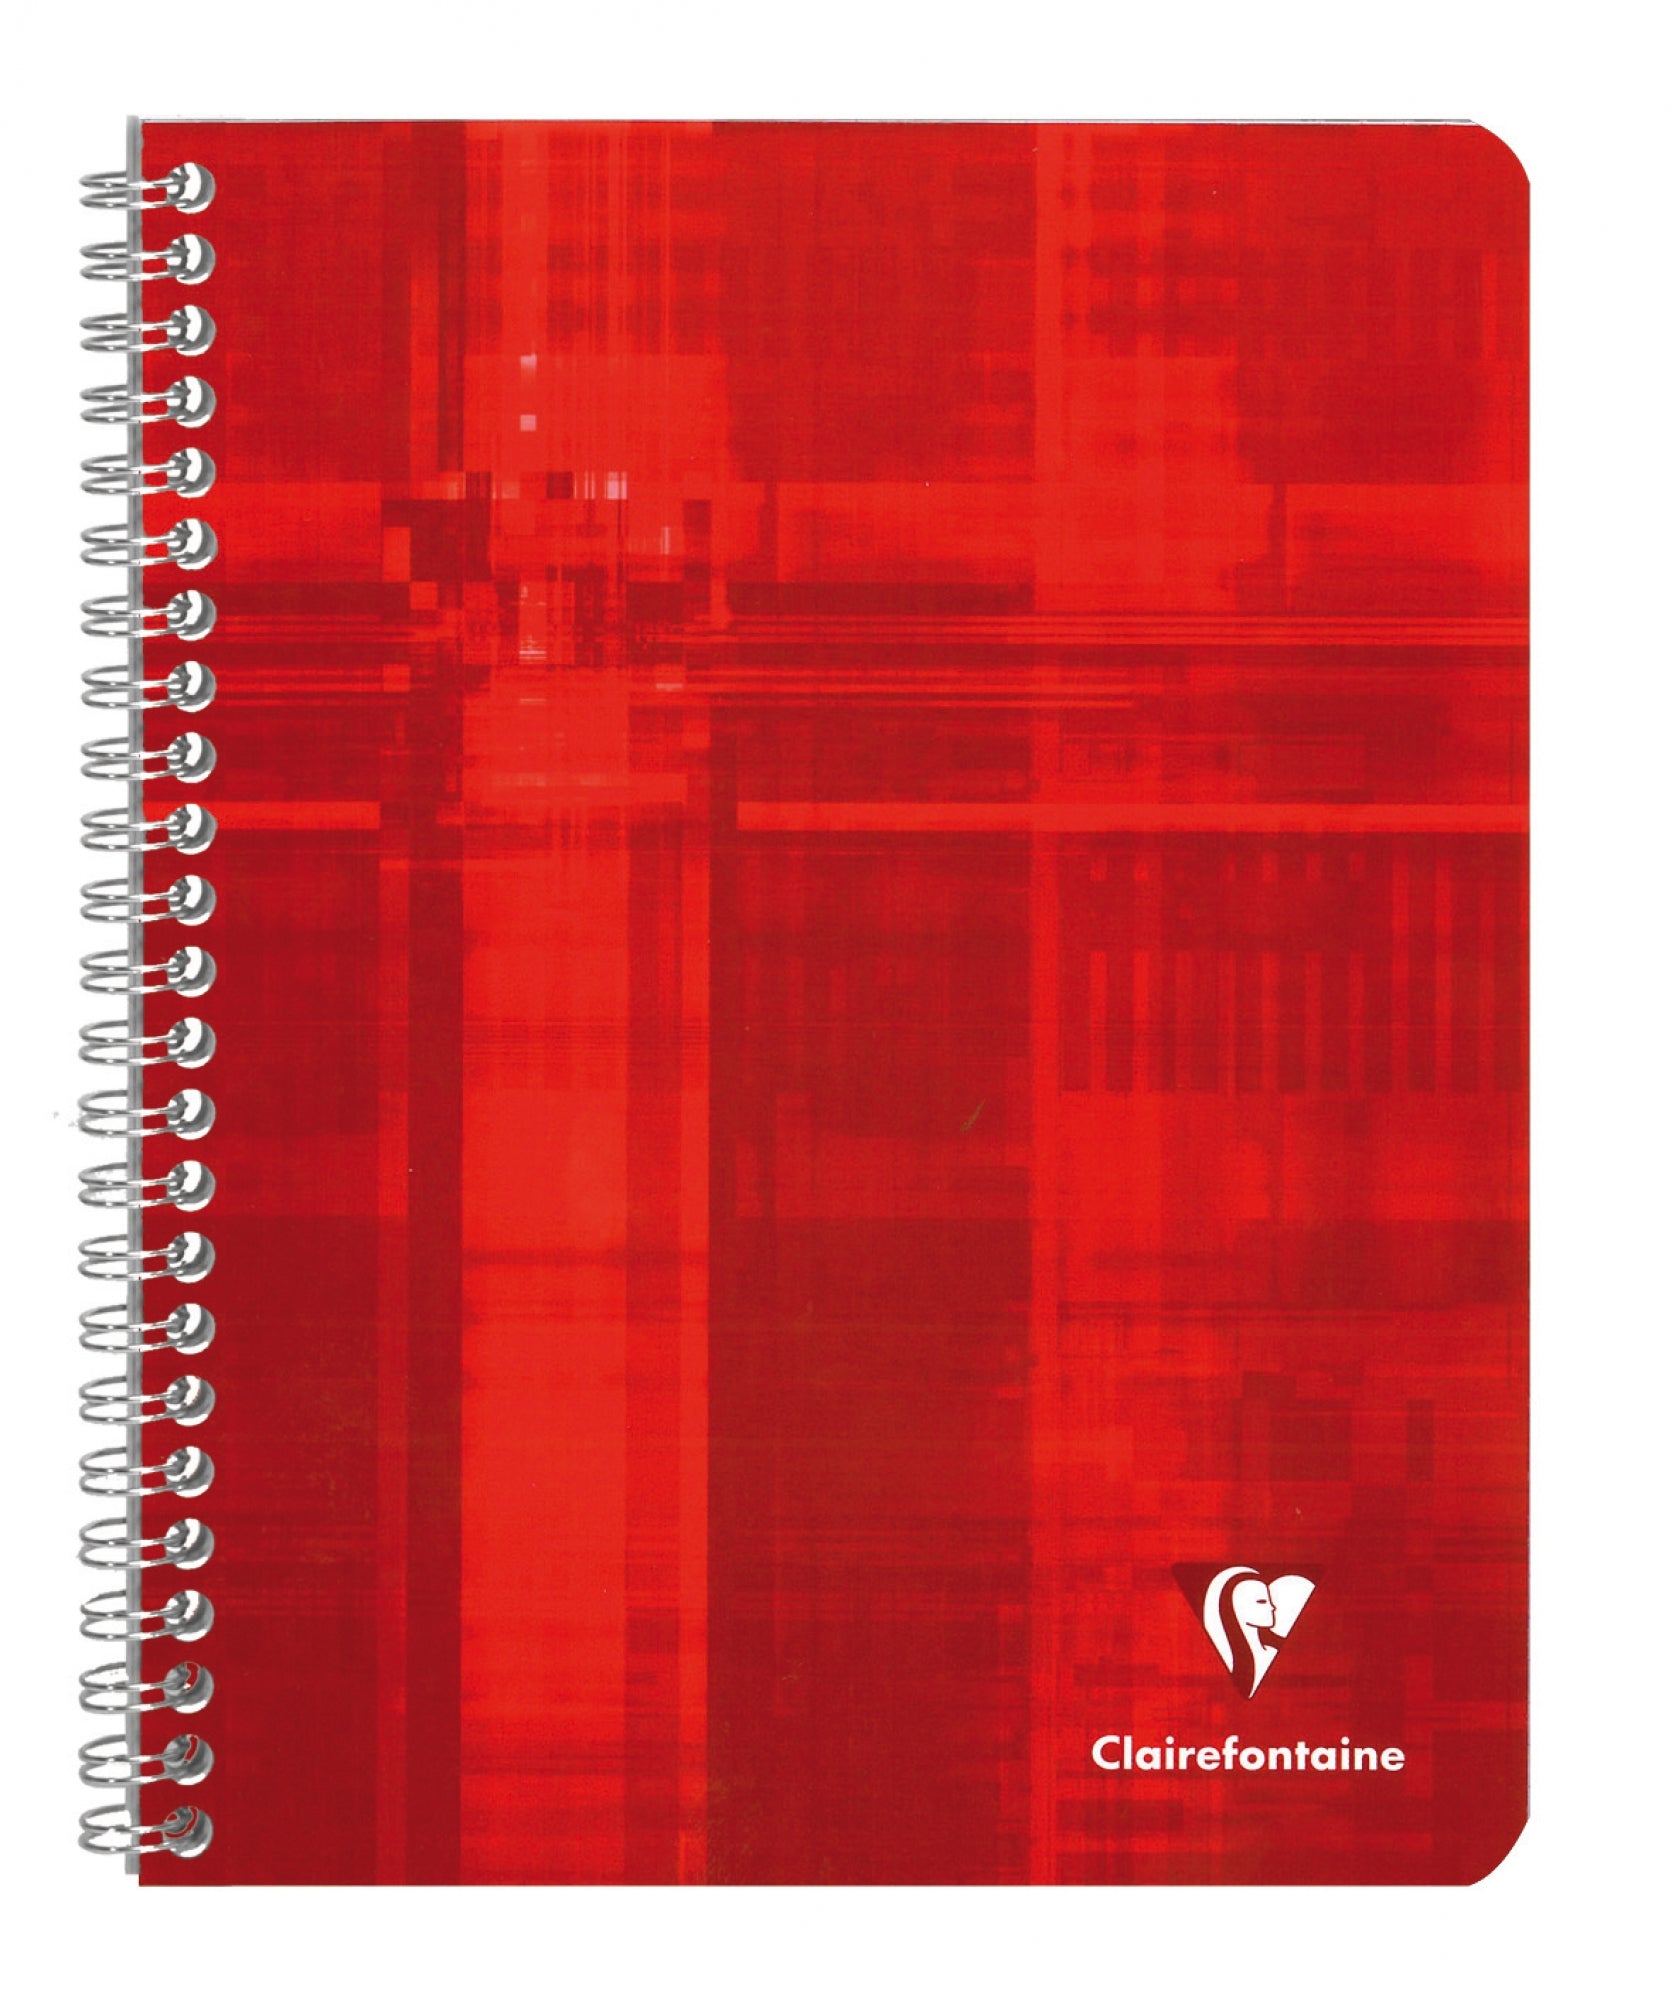 Clairefontaine Classics Side Wirebound 6¾" x 8¾" Multi-Subject Notebook